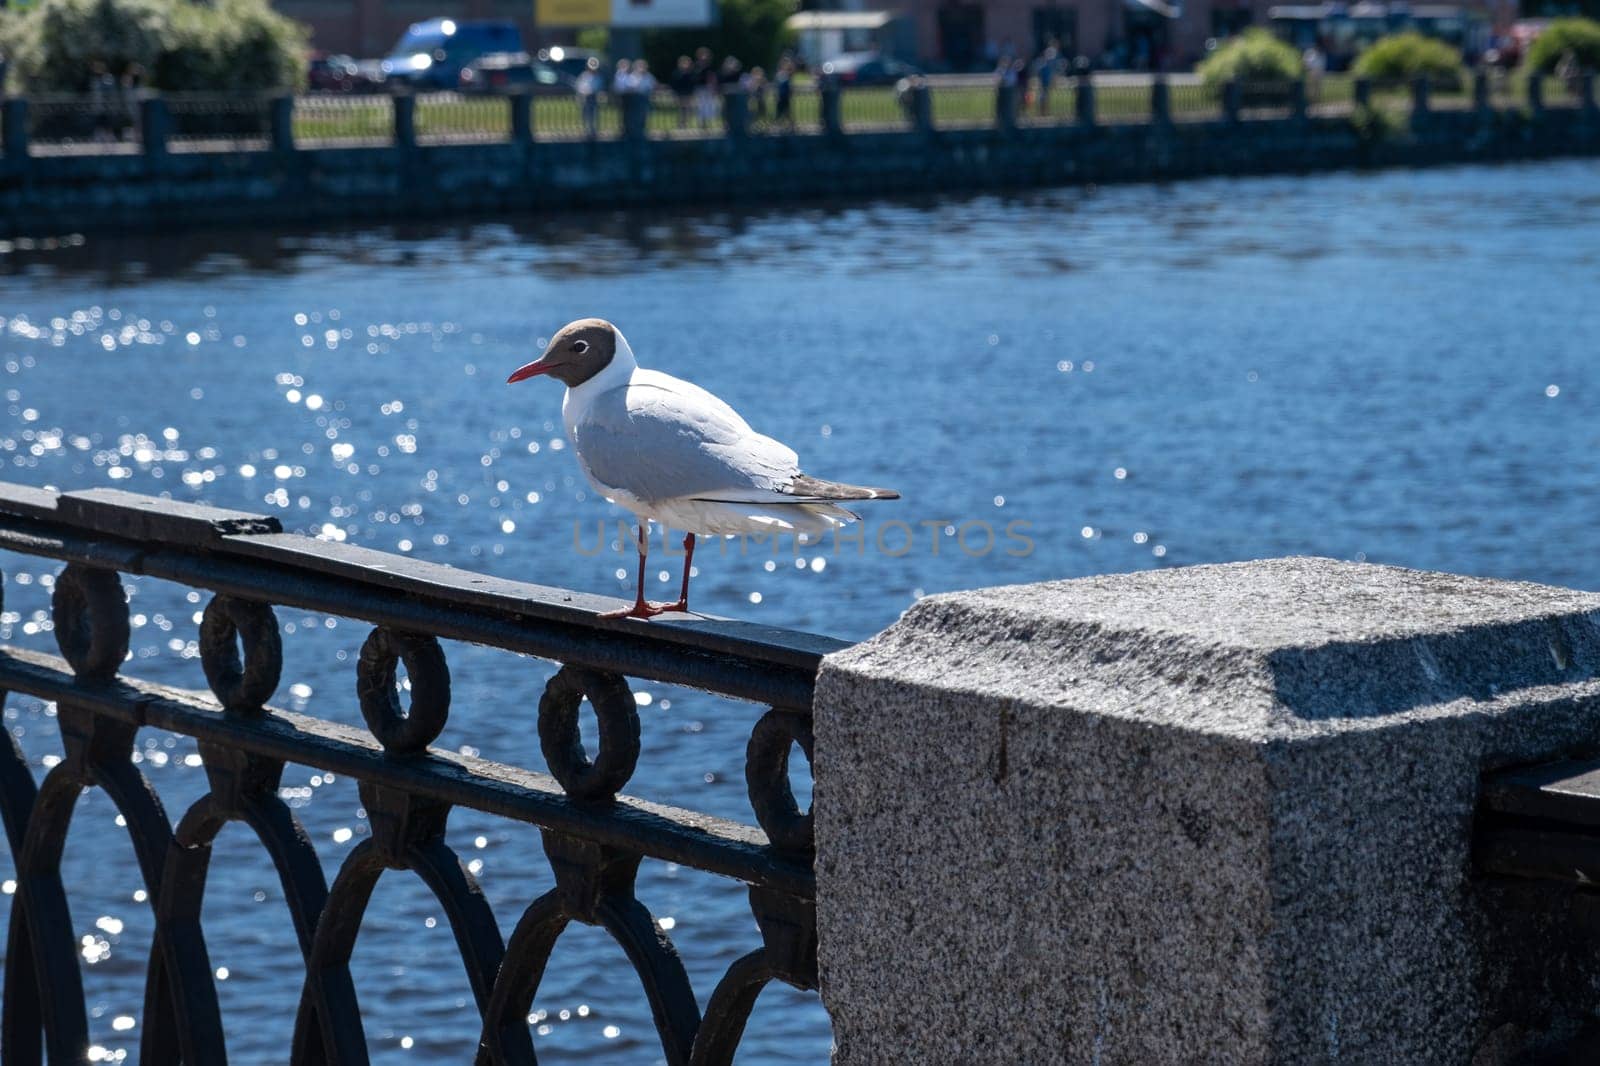 Close-up of a seagull sitting on the embankment fence in the city. Selective focus.